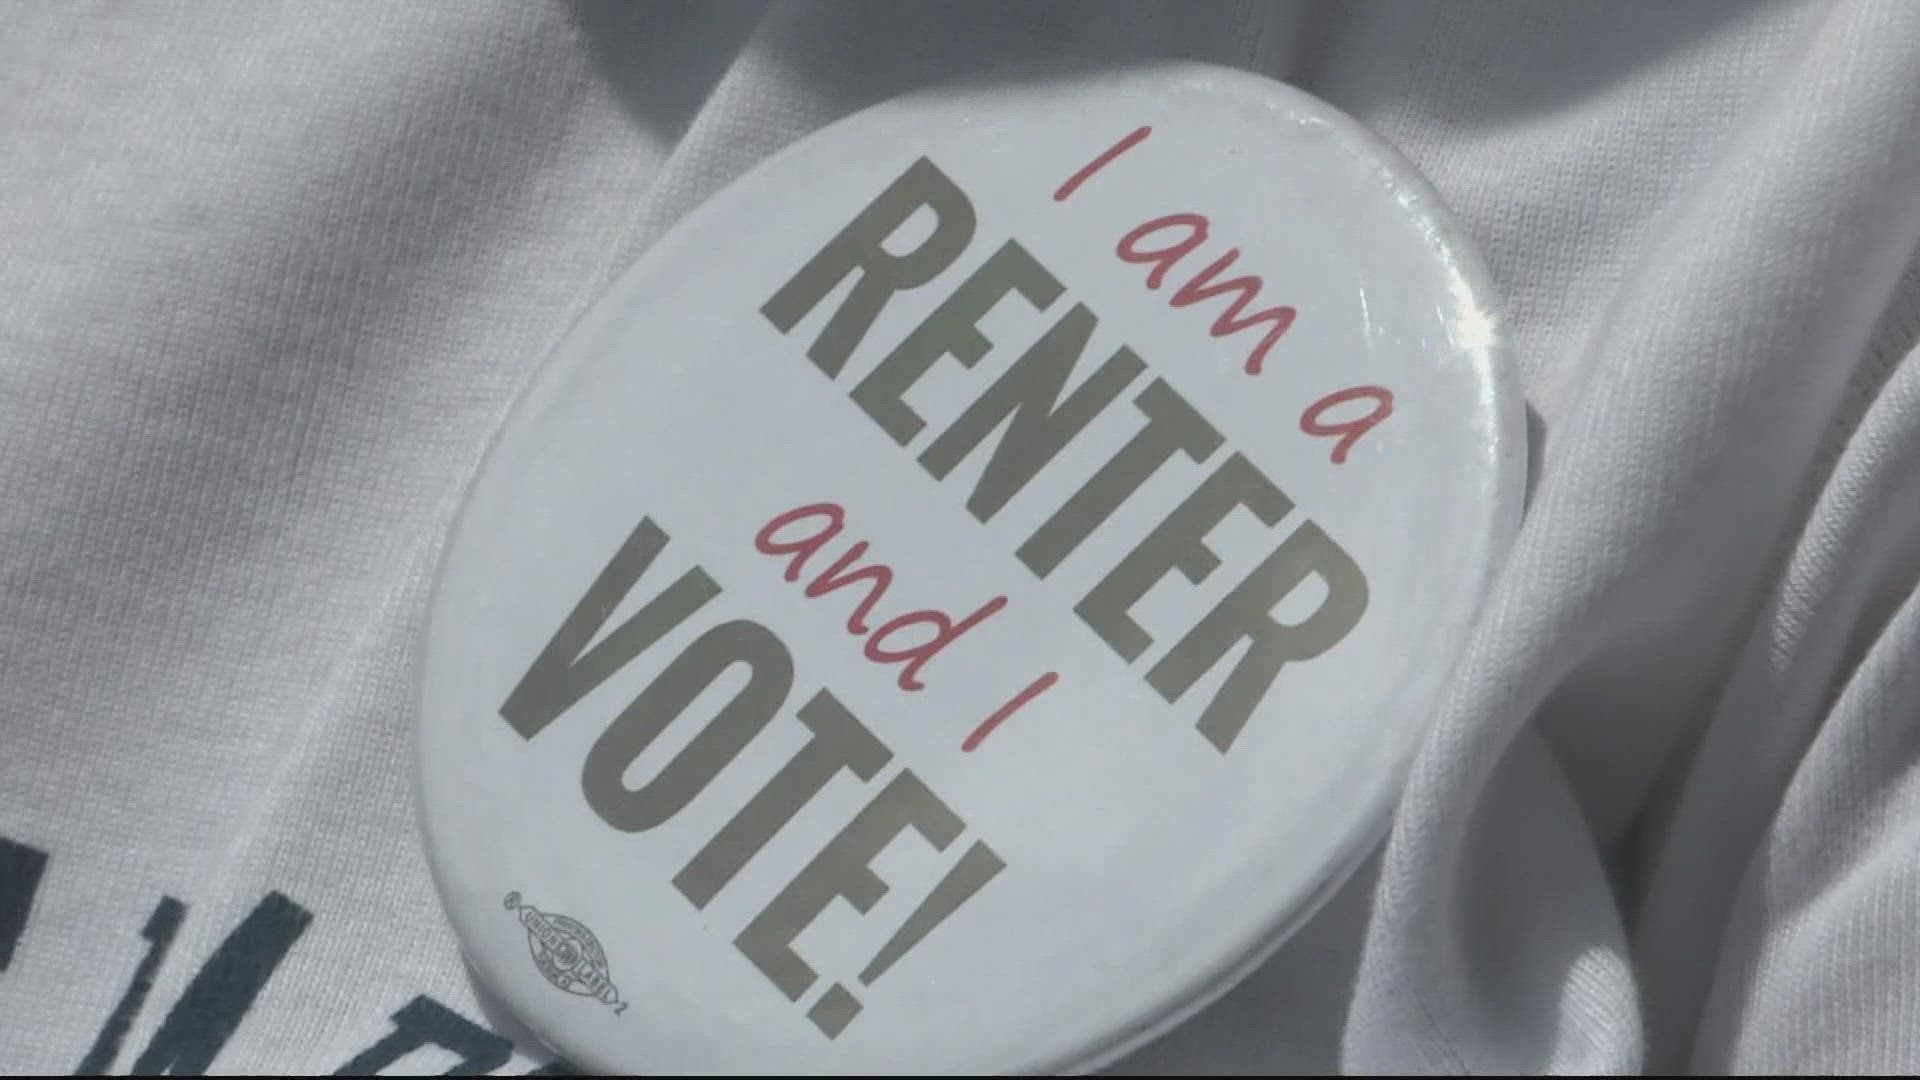 Nearly 40% of county residents are renters, according to Matt Losak, executive director of the Montgomery County Renters Alliance.